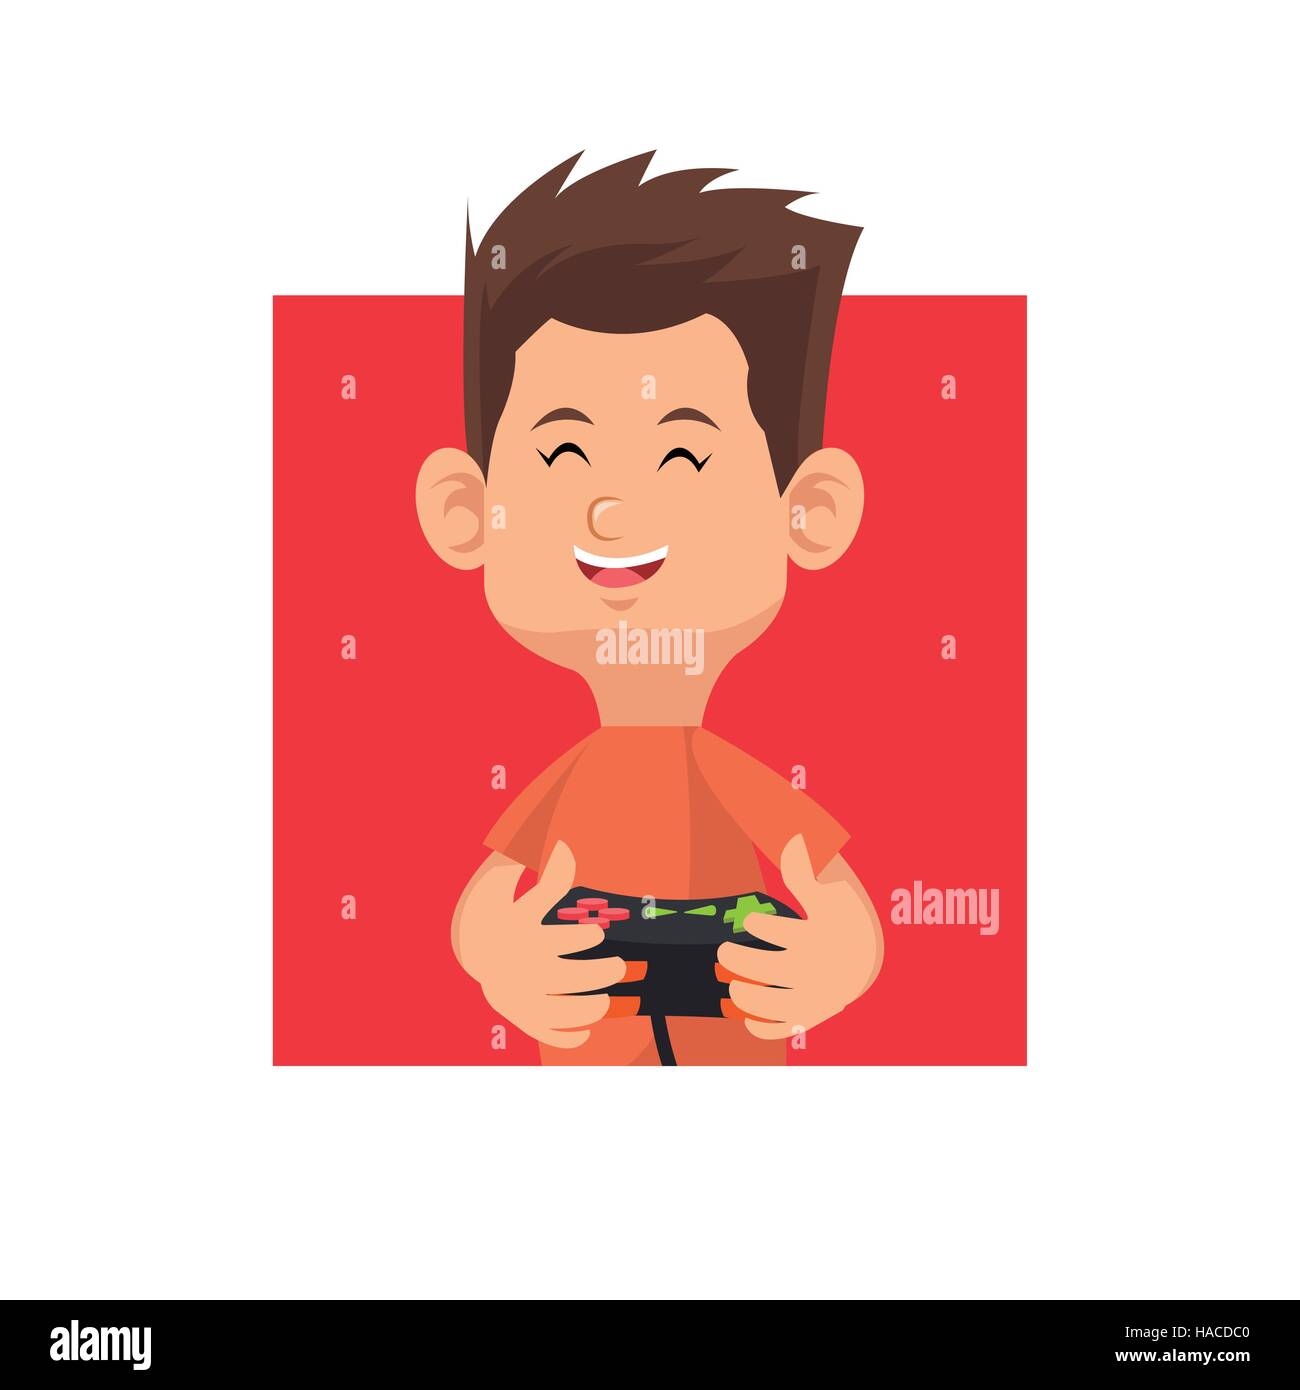 Premium Vector  Teenager boy child playing online video game on computer  isolated flat cartoon character in